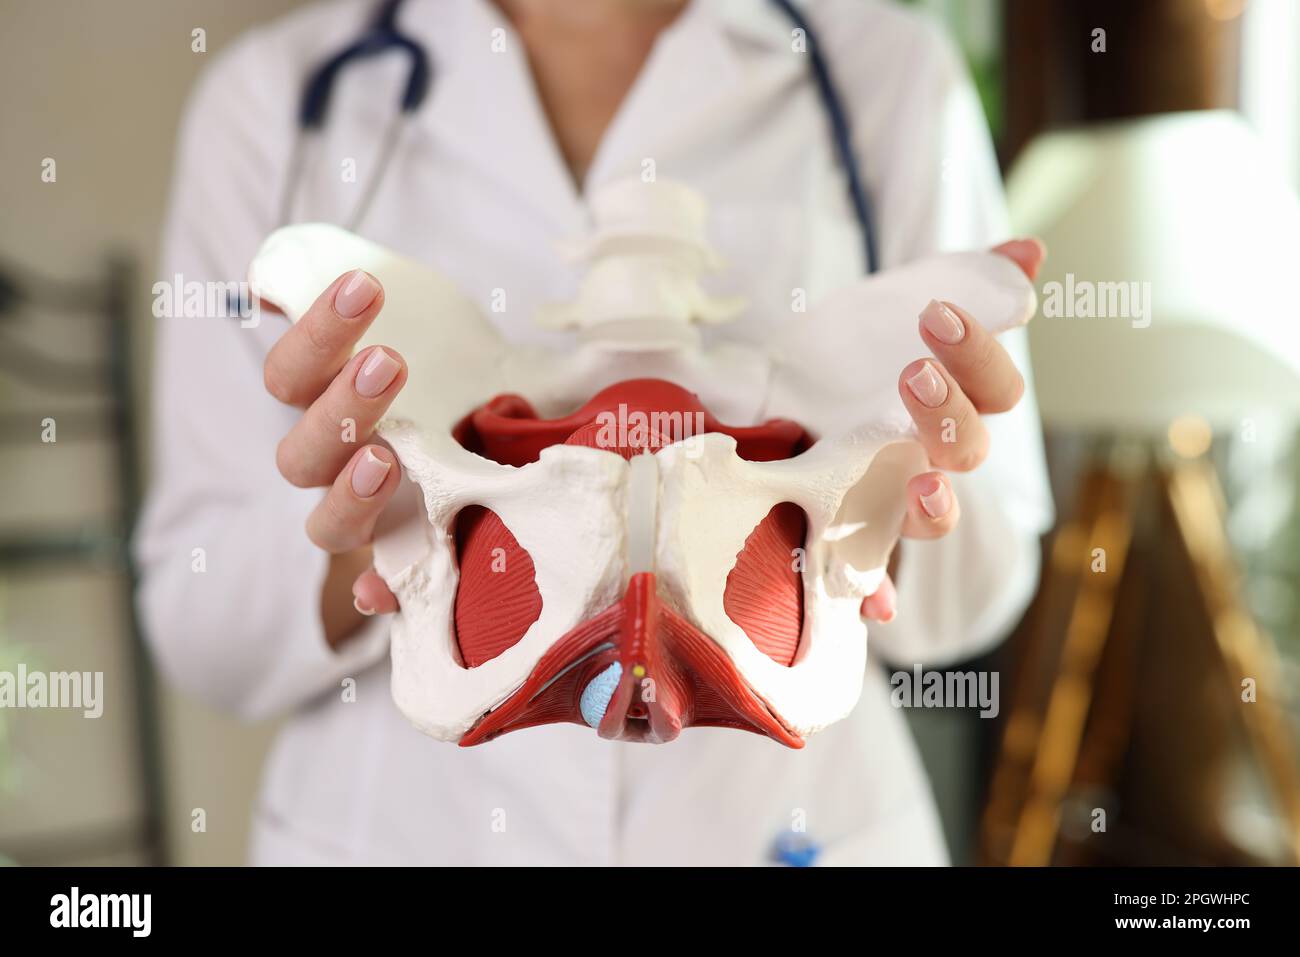 Gynecologist shows female pelvis with reproductive organs Stock Photo